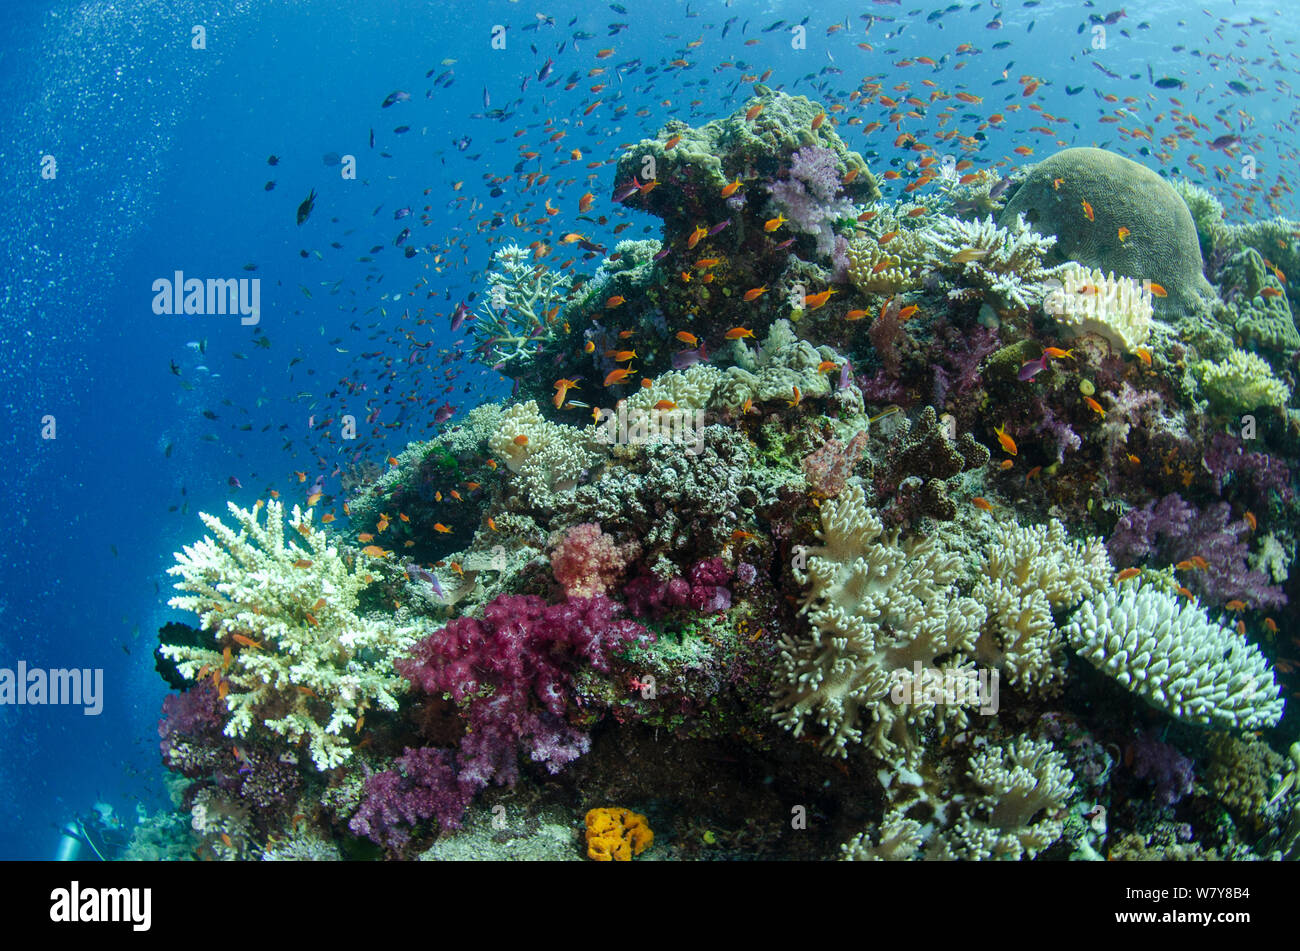 Mixed shoal of fish over diverse coral reef, Fiji, South Pacific. Stock Photo